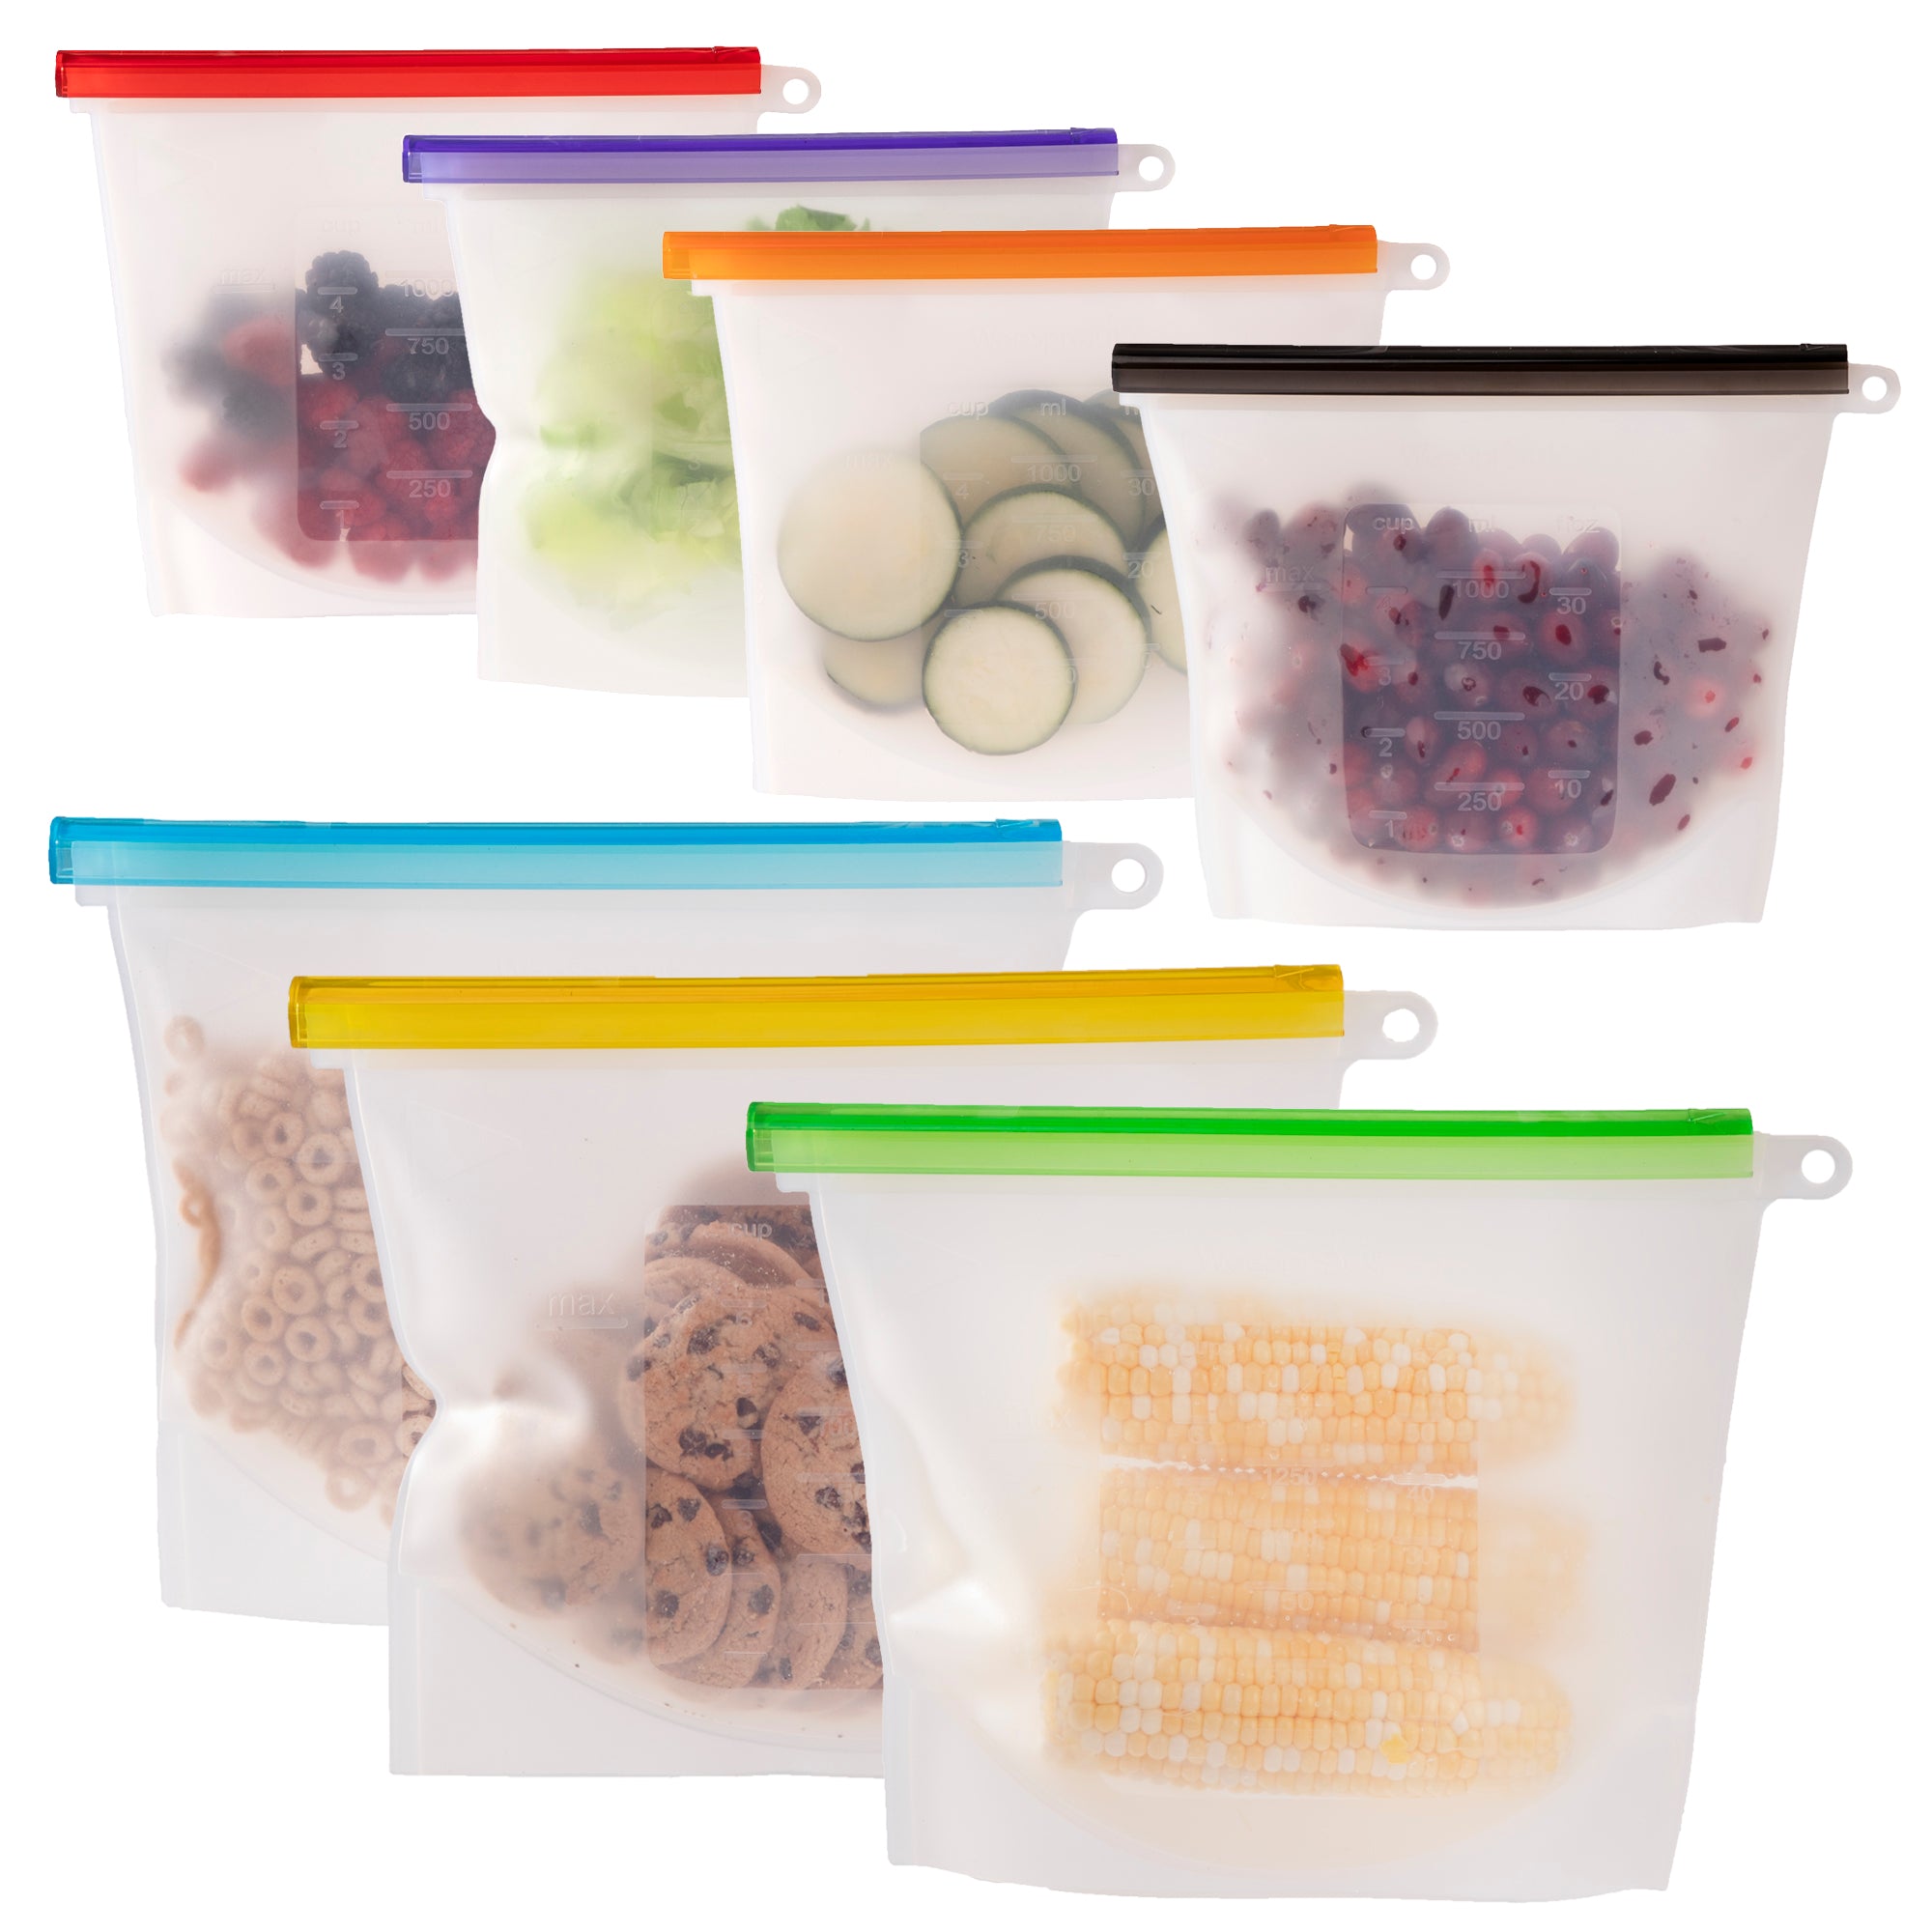 Reusable Silicone Food Storage Bags - Reusable Silicone Food Bag 6 Pack  Airtight Food Fresh Preserving Bag for Sandwich, Vegetables,Snack,Liquid,2